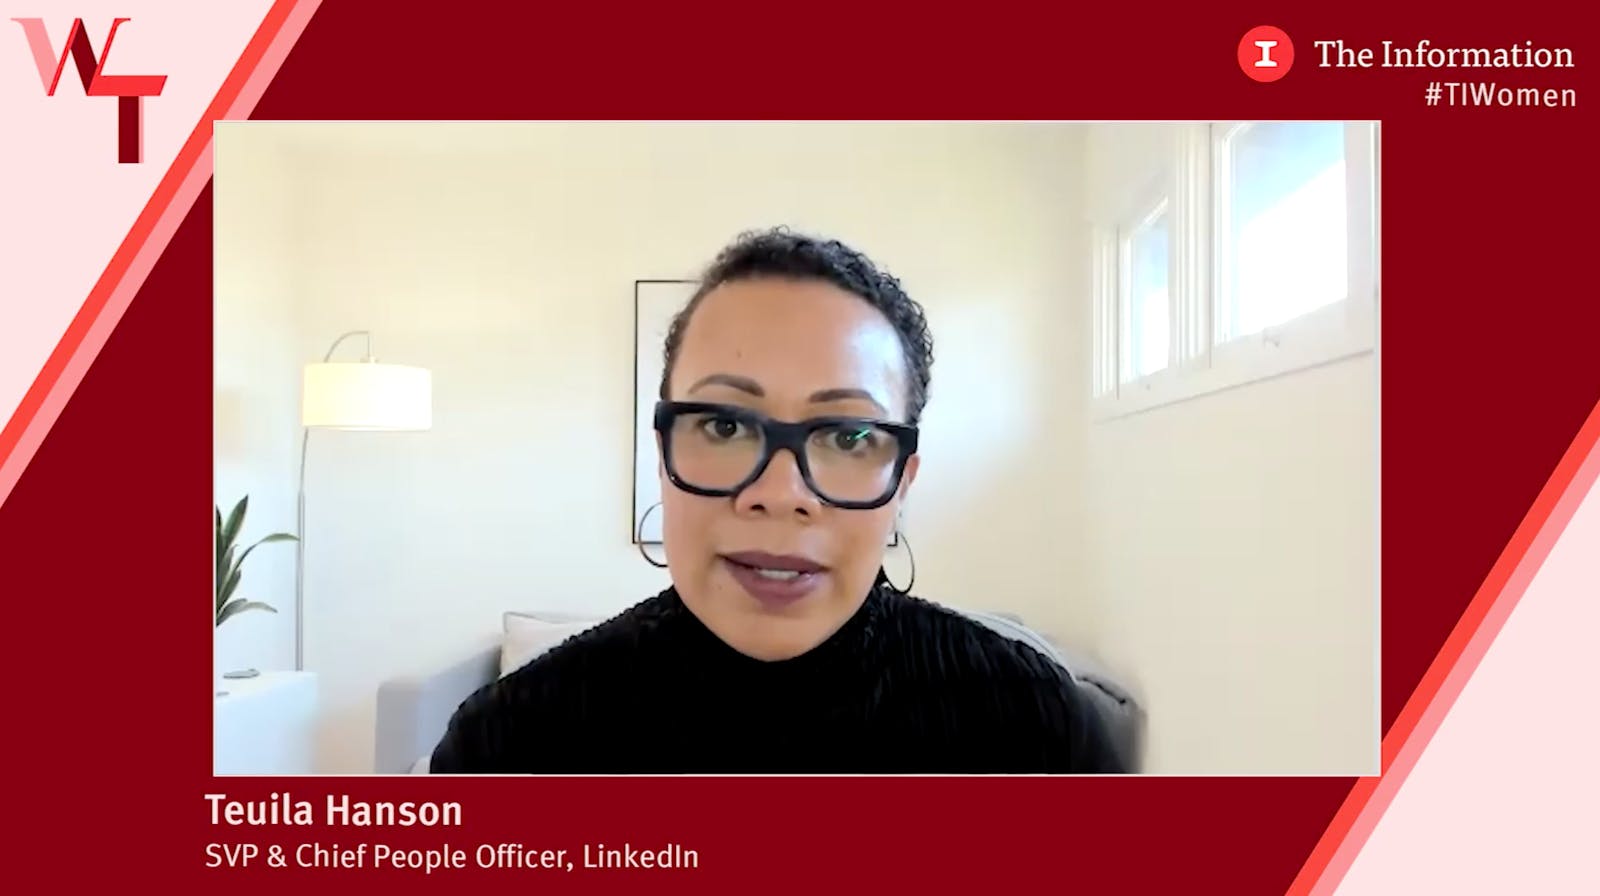 LinkedIn Chief People Officer, Teuila Hanson